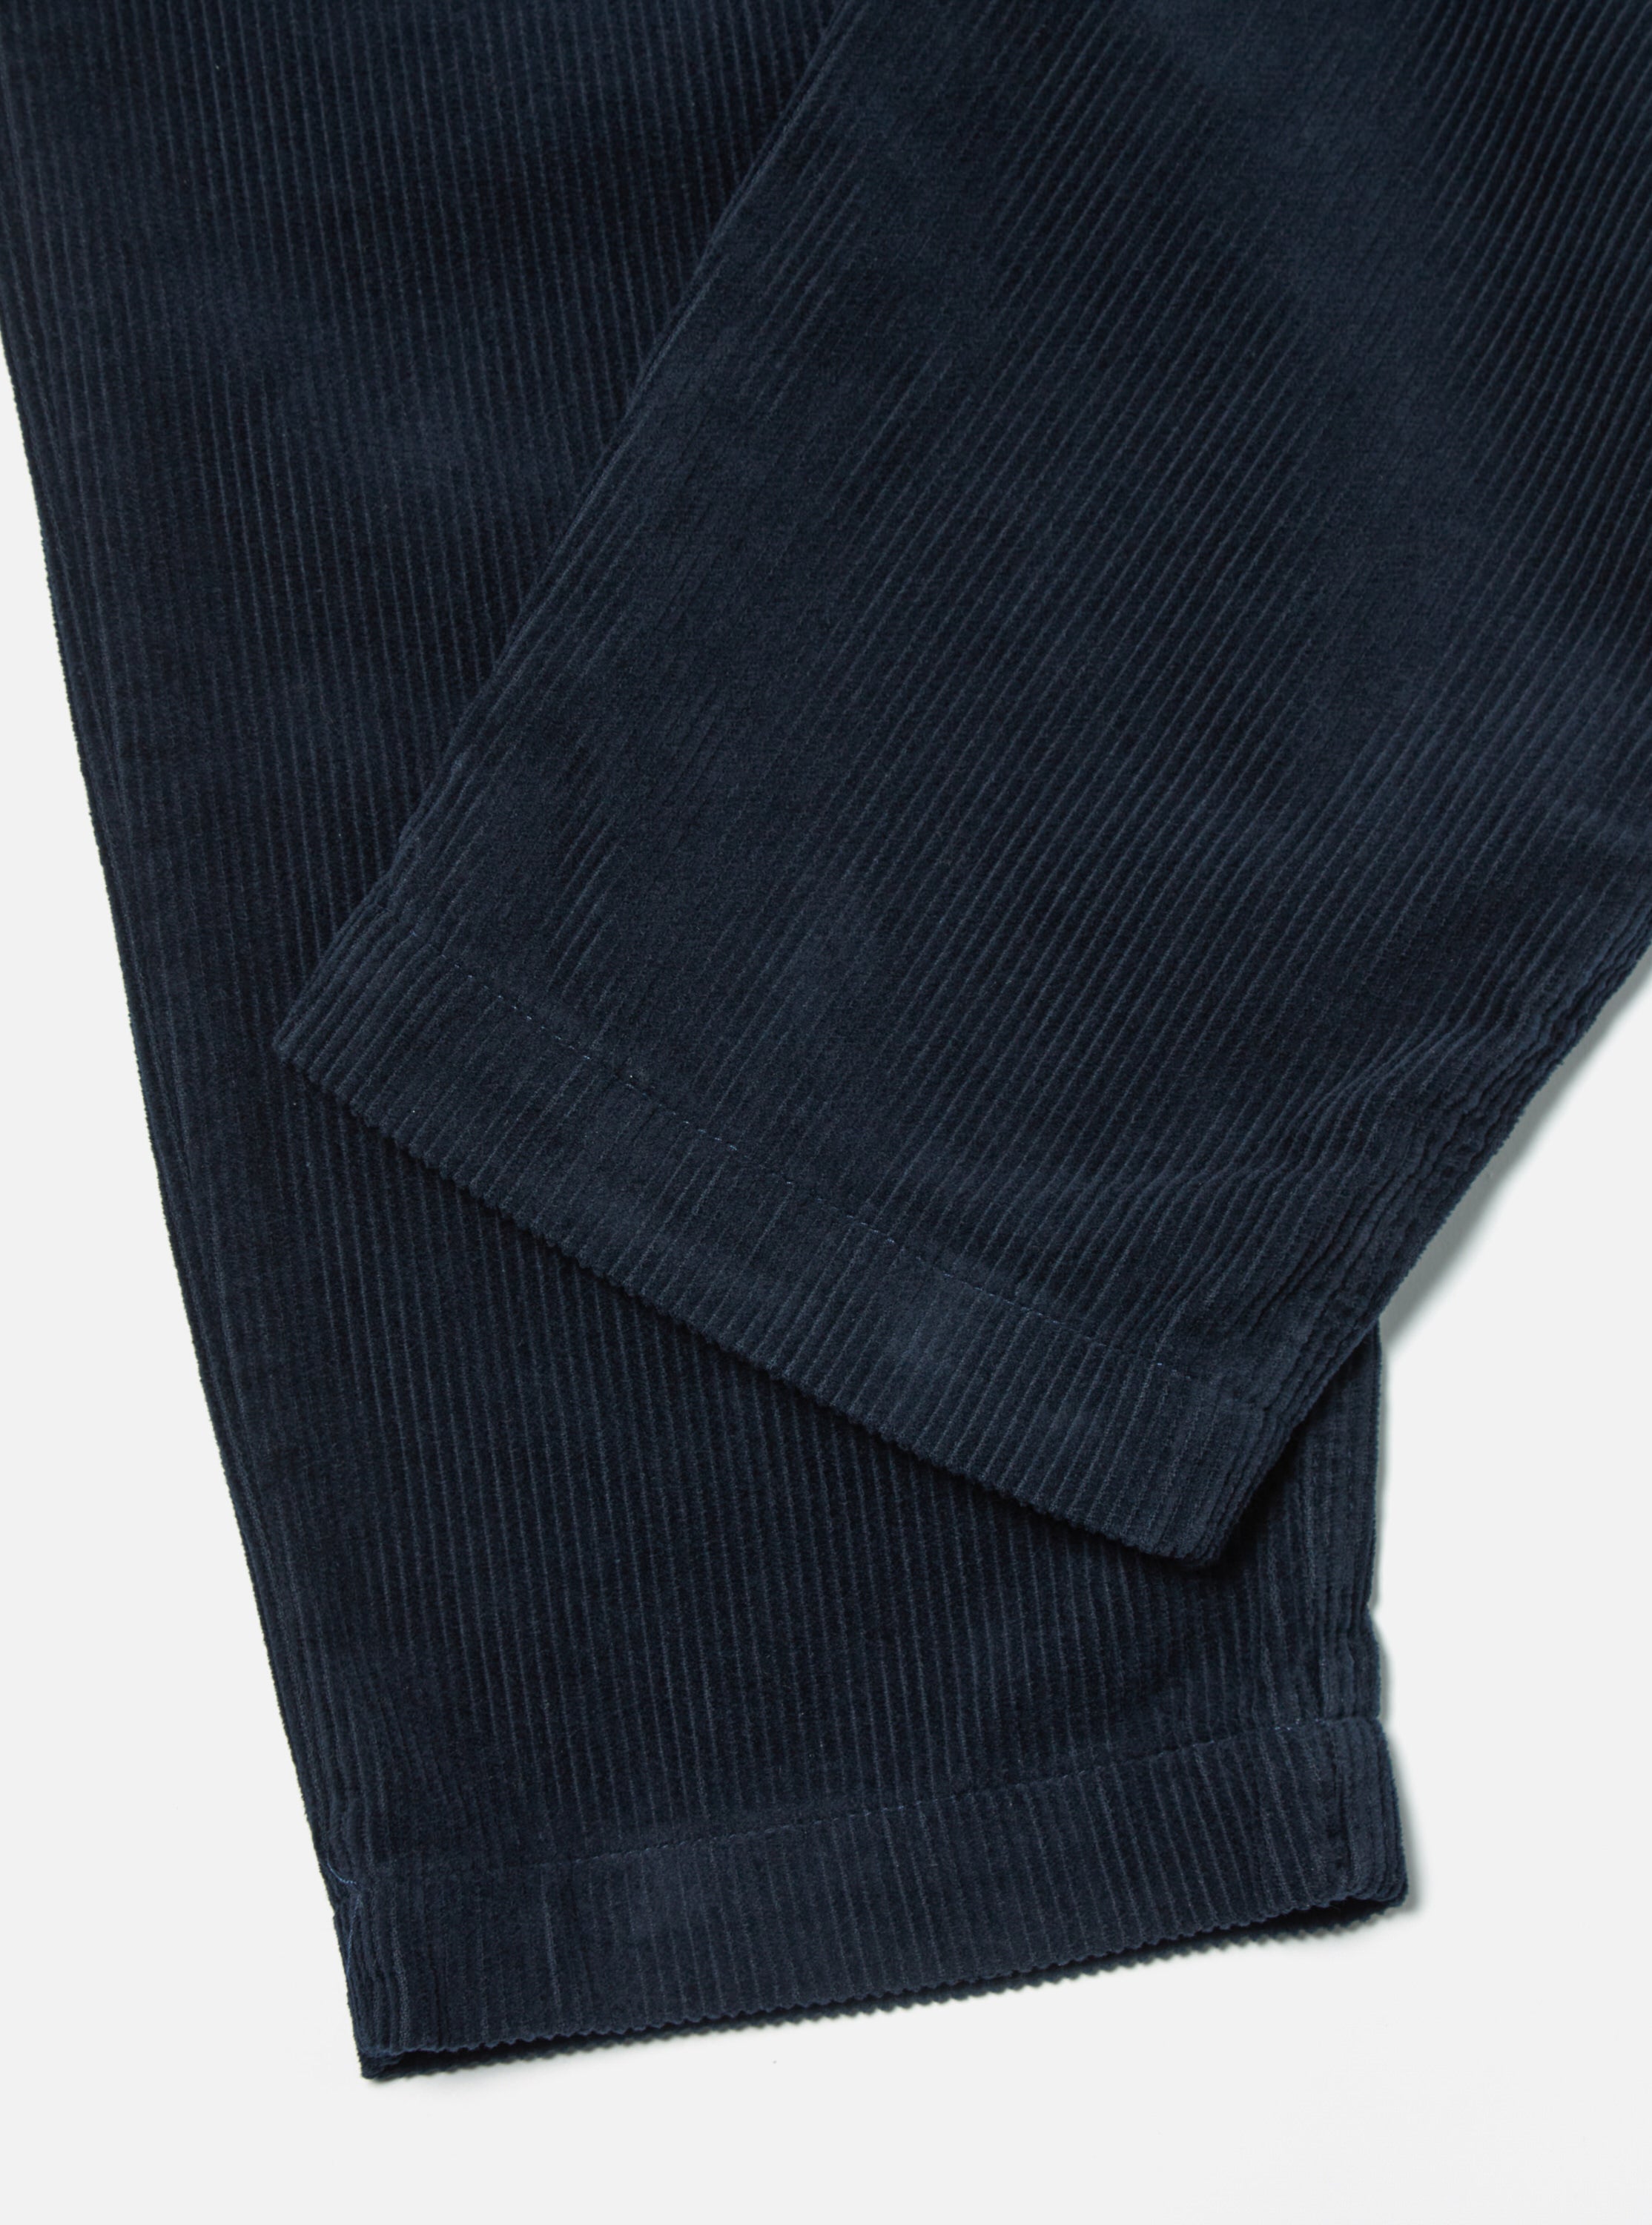 Universal Works Military Chino in Navy Cord